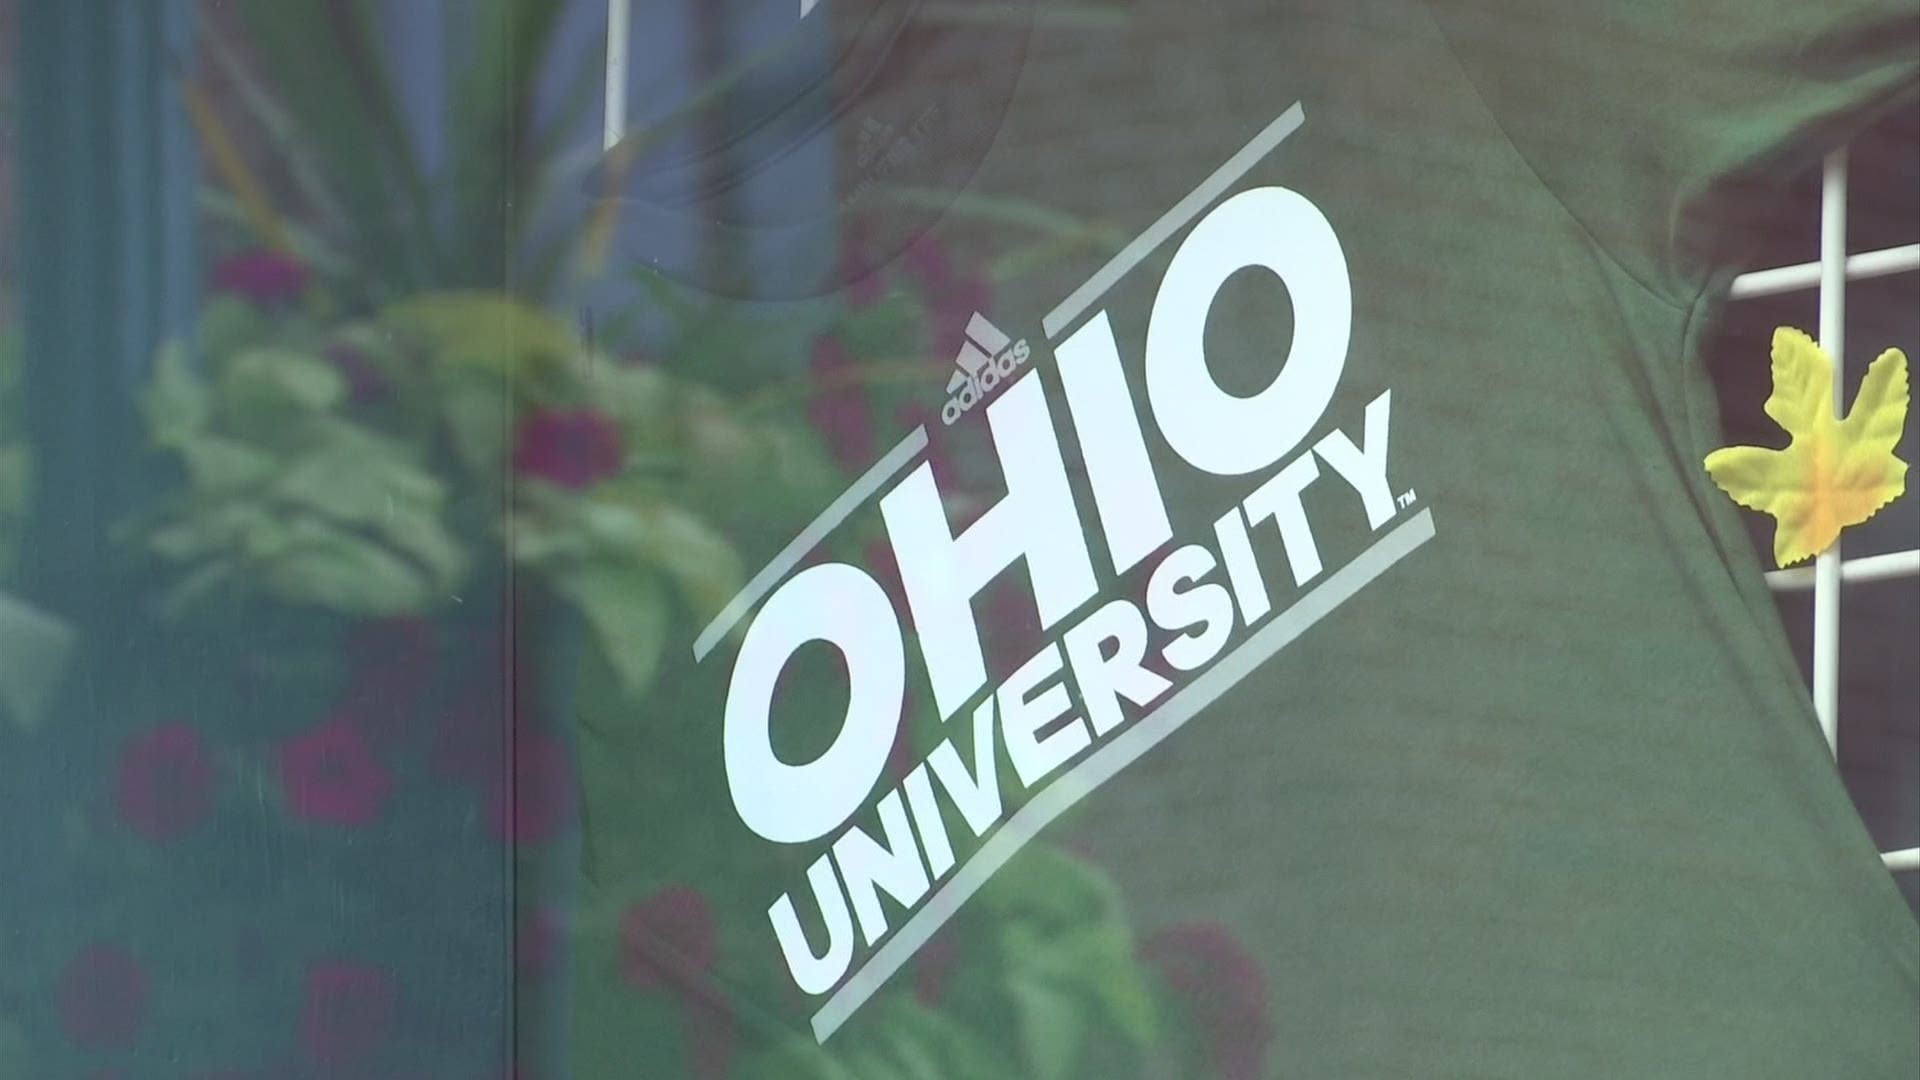 The MAC says it's working with universities to create detailed plans for safety.